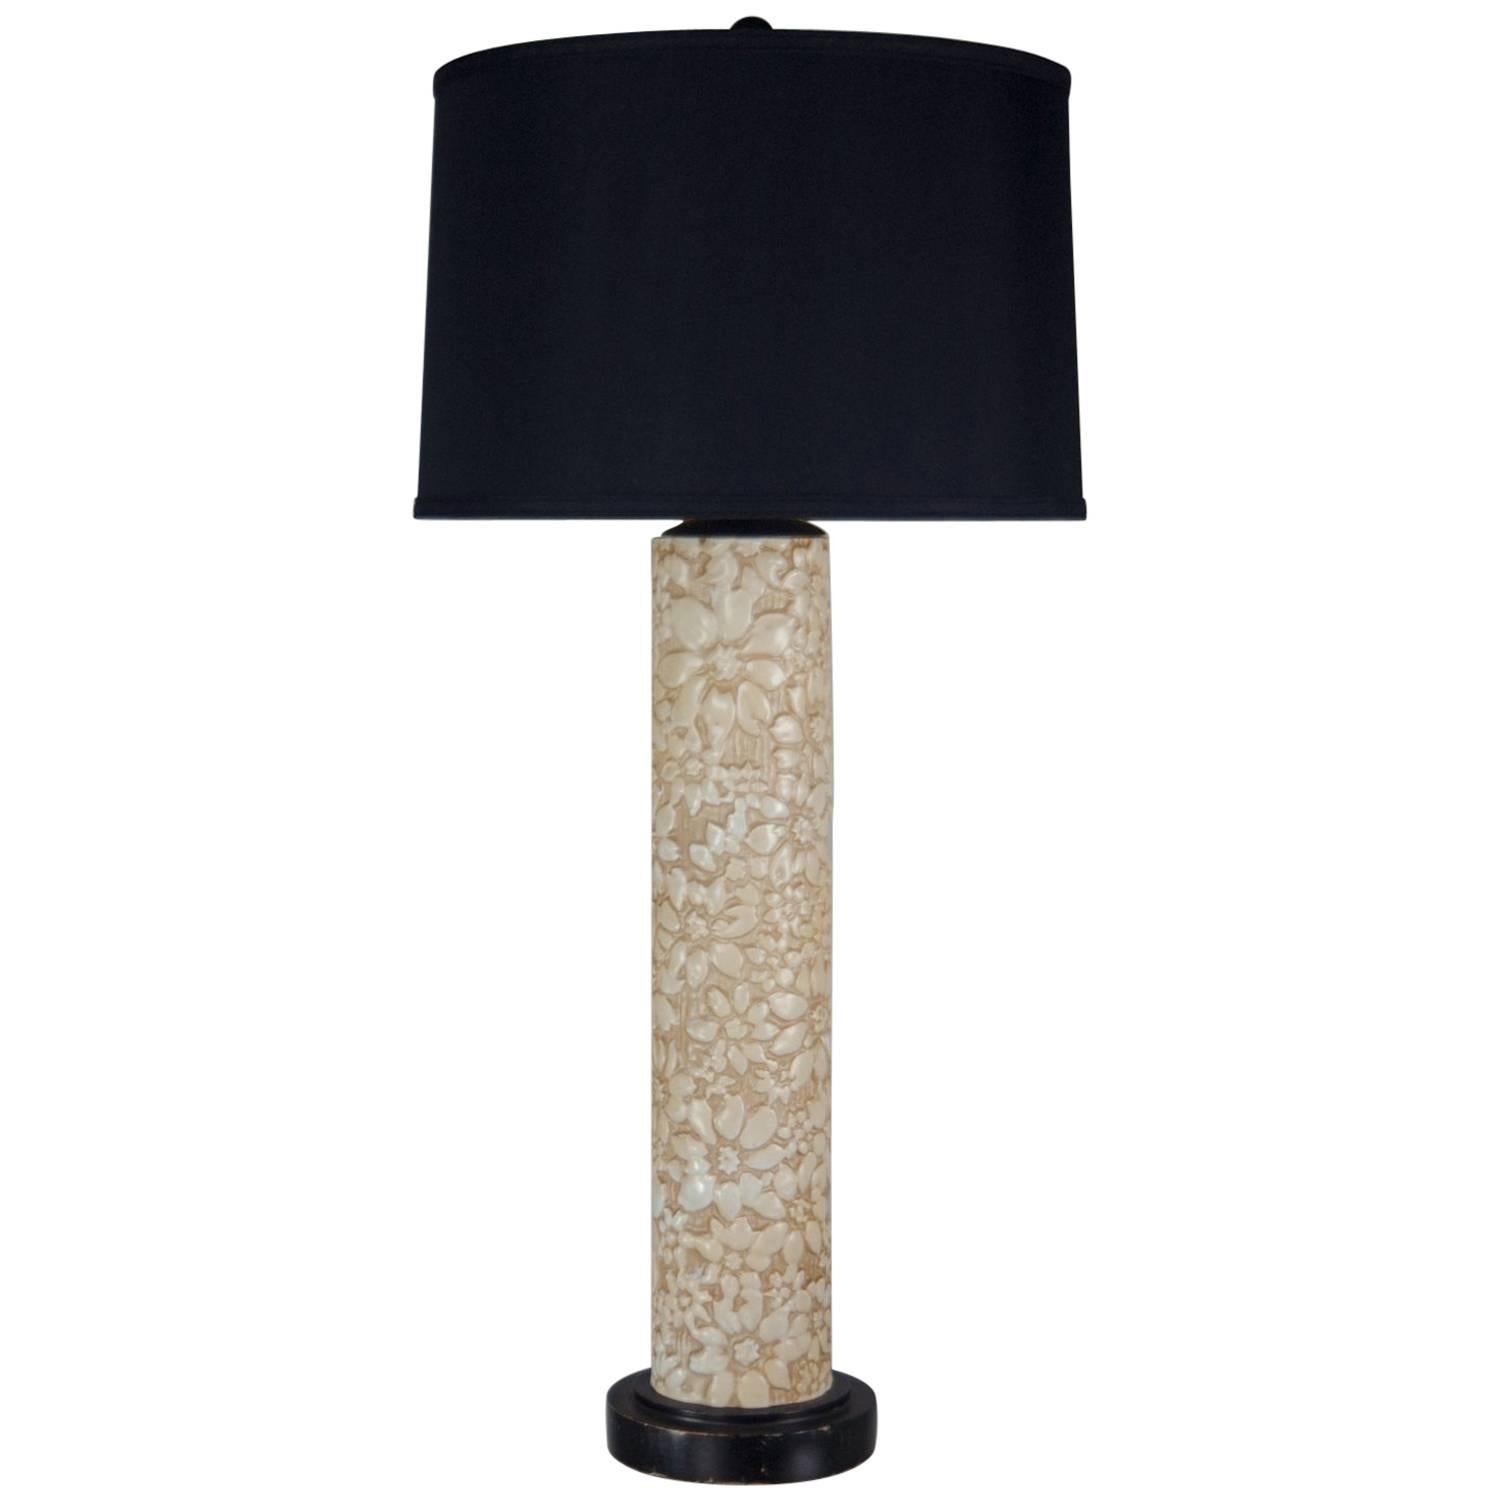 Ivory Ceramic Embossed Flower Table Lamp with Black and Gold Shade For Sale